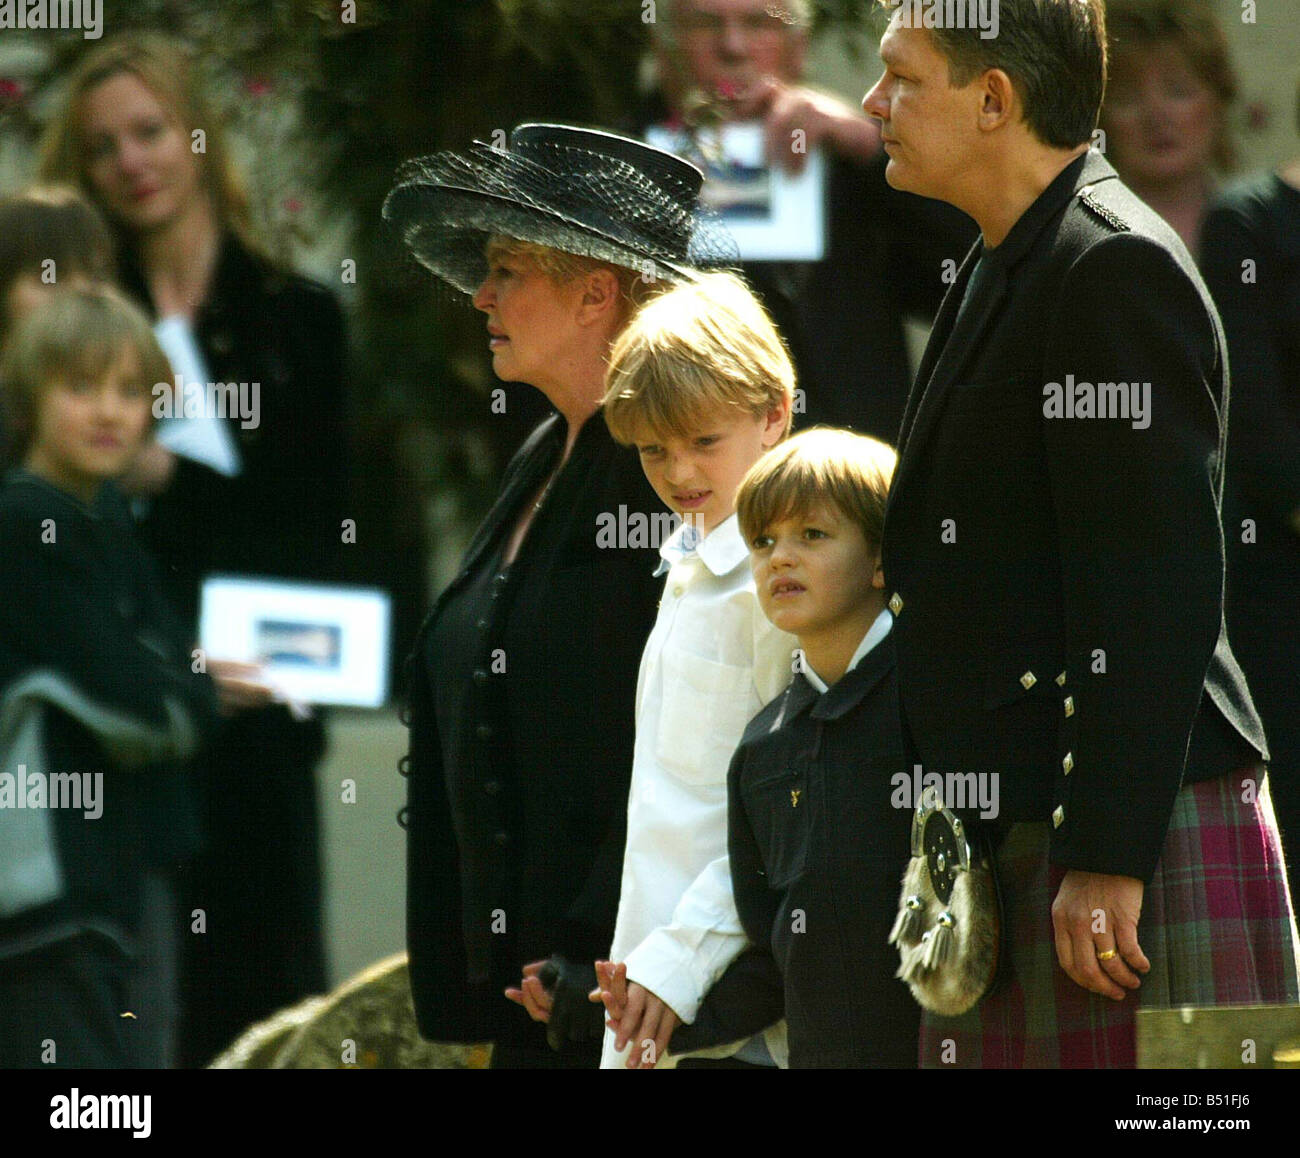 Caron Keating Funeral April 2004 St Peters Church in the grounds of Hever Castle in Kent Picture shows mother Gloria Hunniford children sons Charlie Lindsay Gabriel Lindsay husband Russ Lindsay Stock Photo